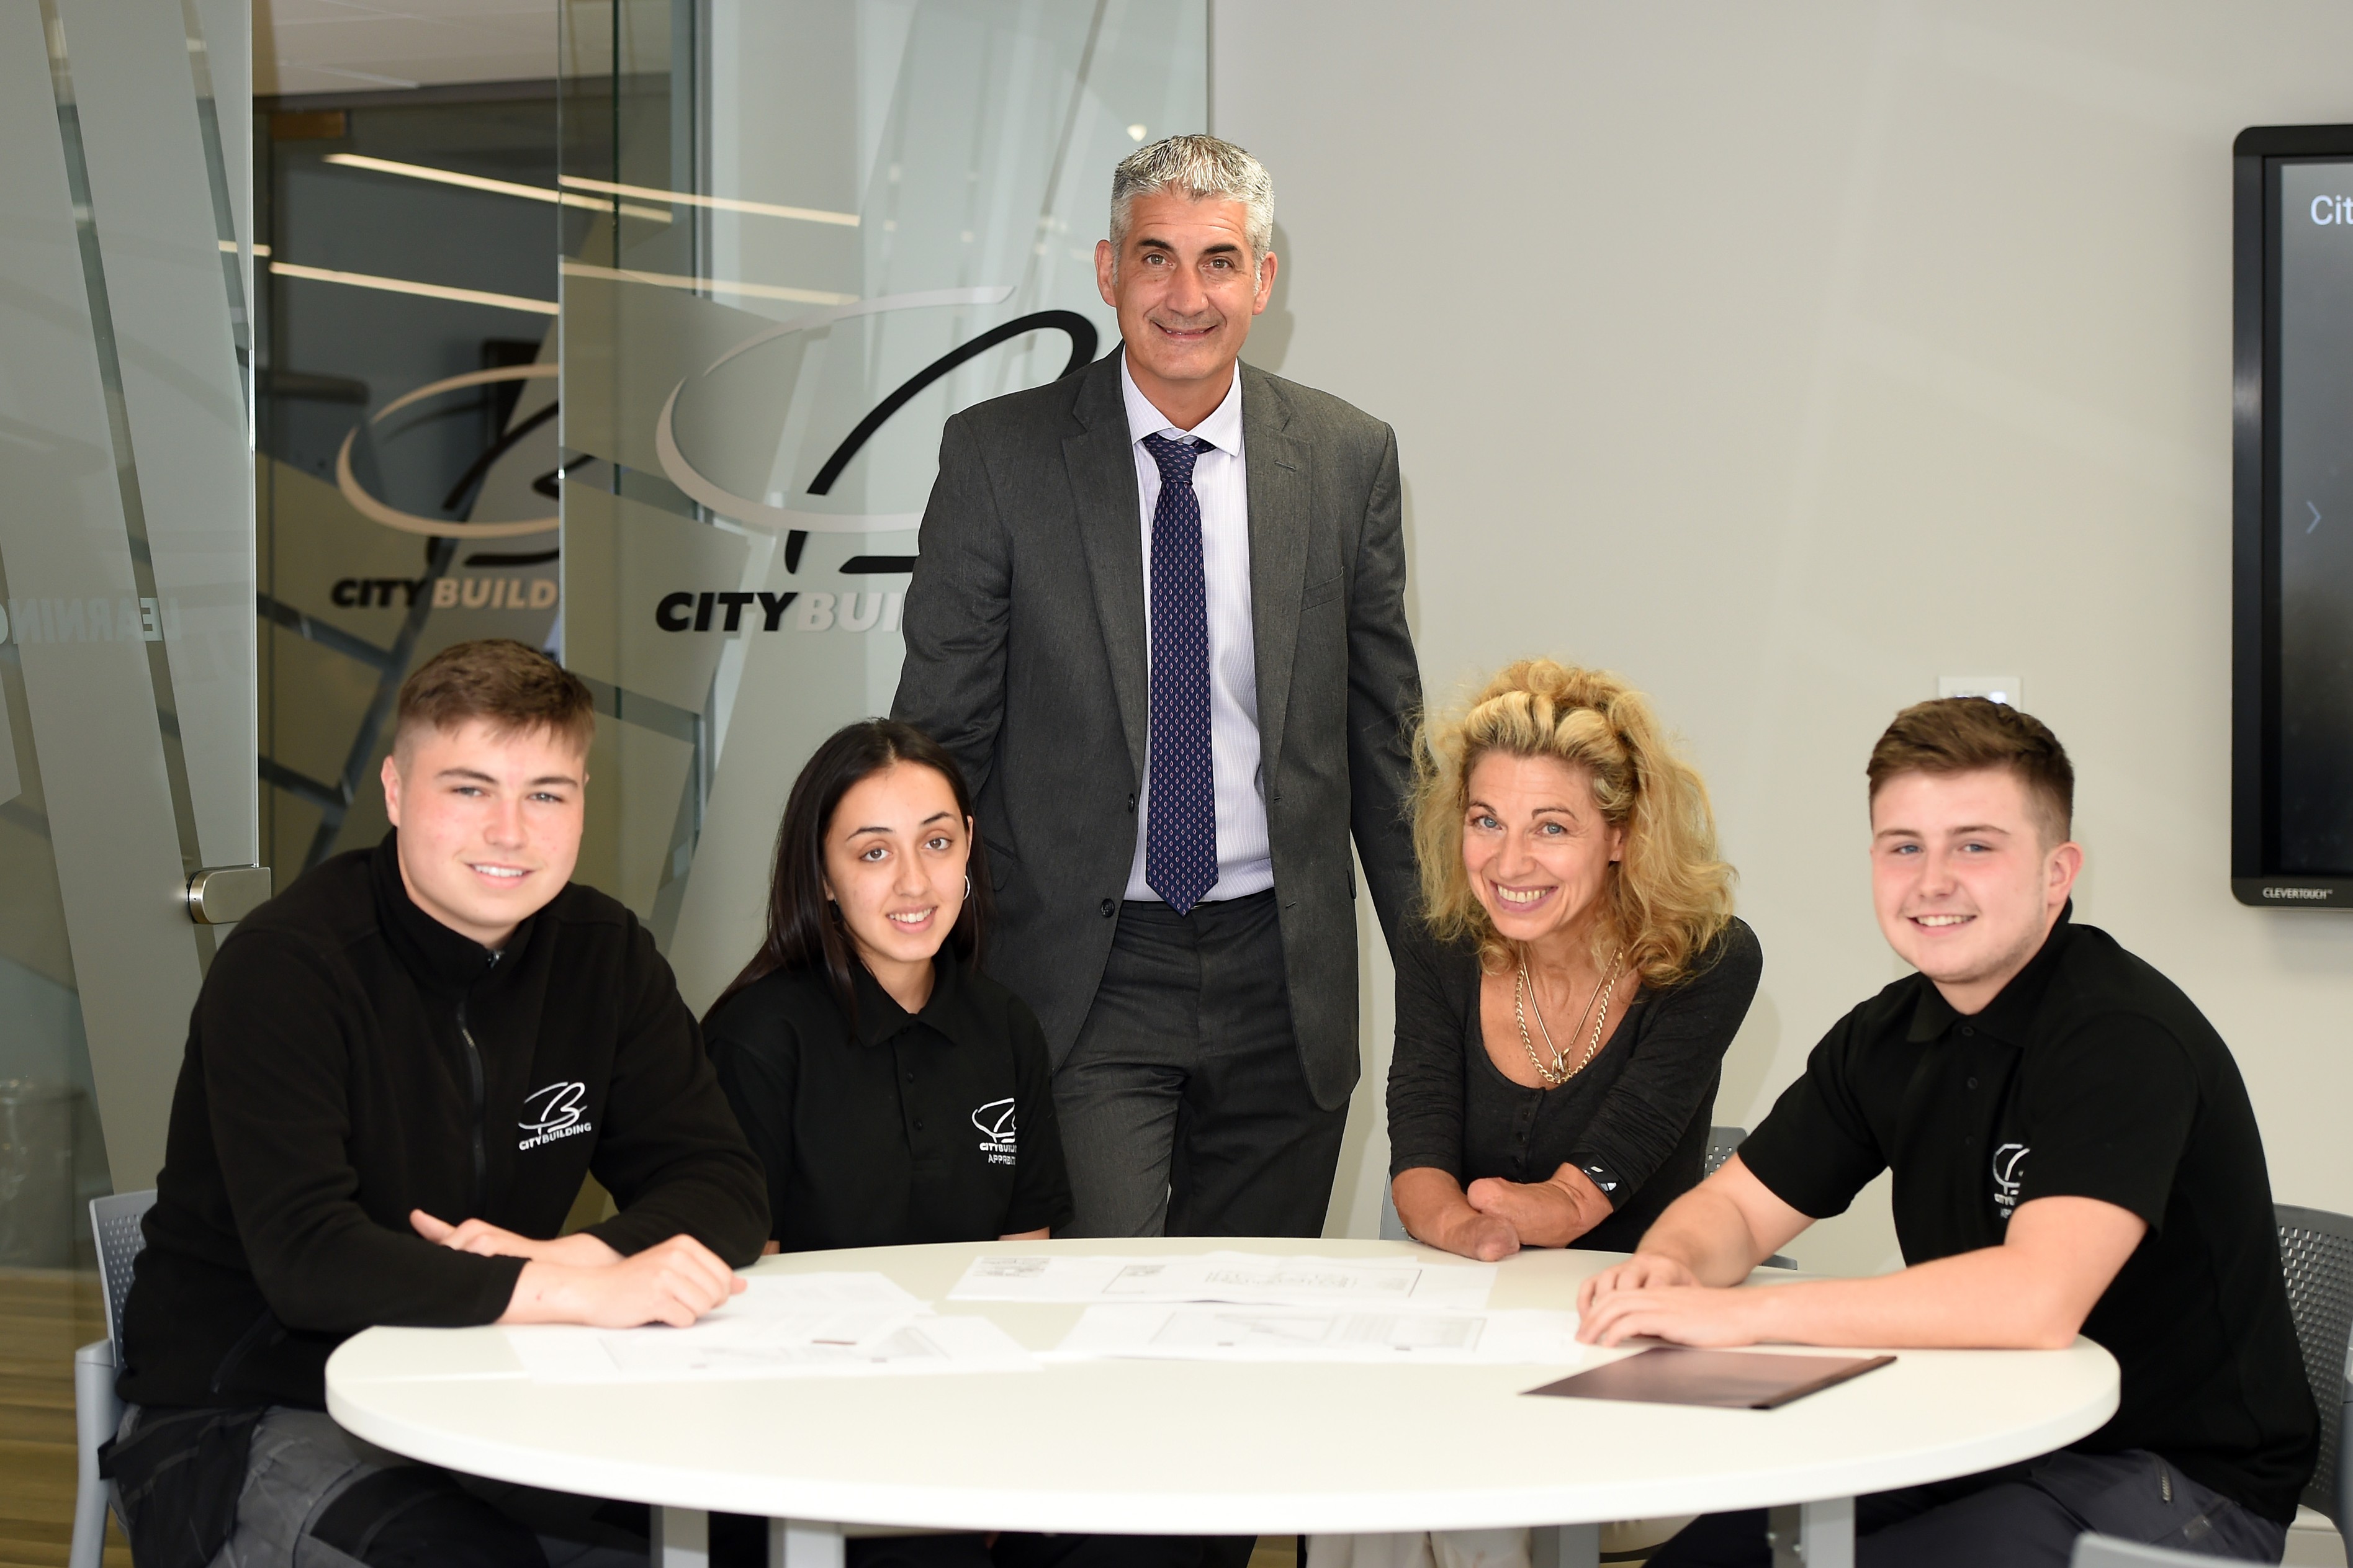 City Building apprentices meet Olivia Giles ahead of Malawi trip